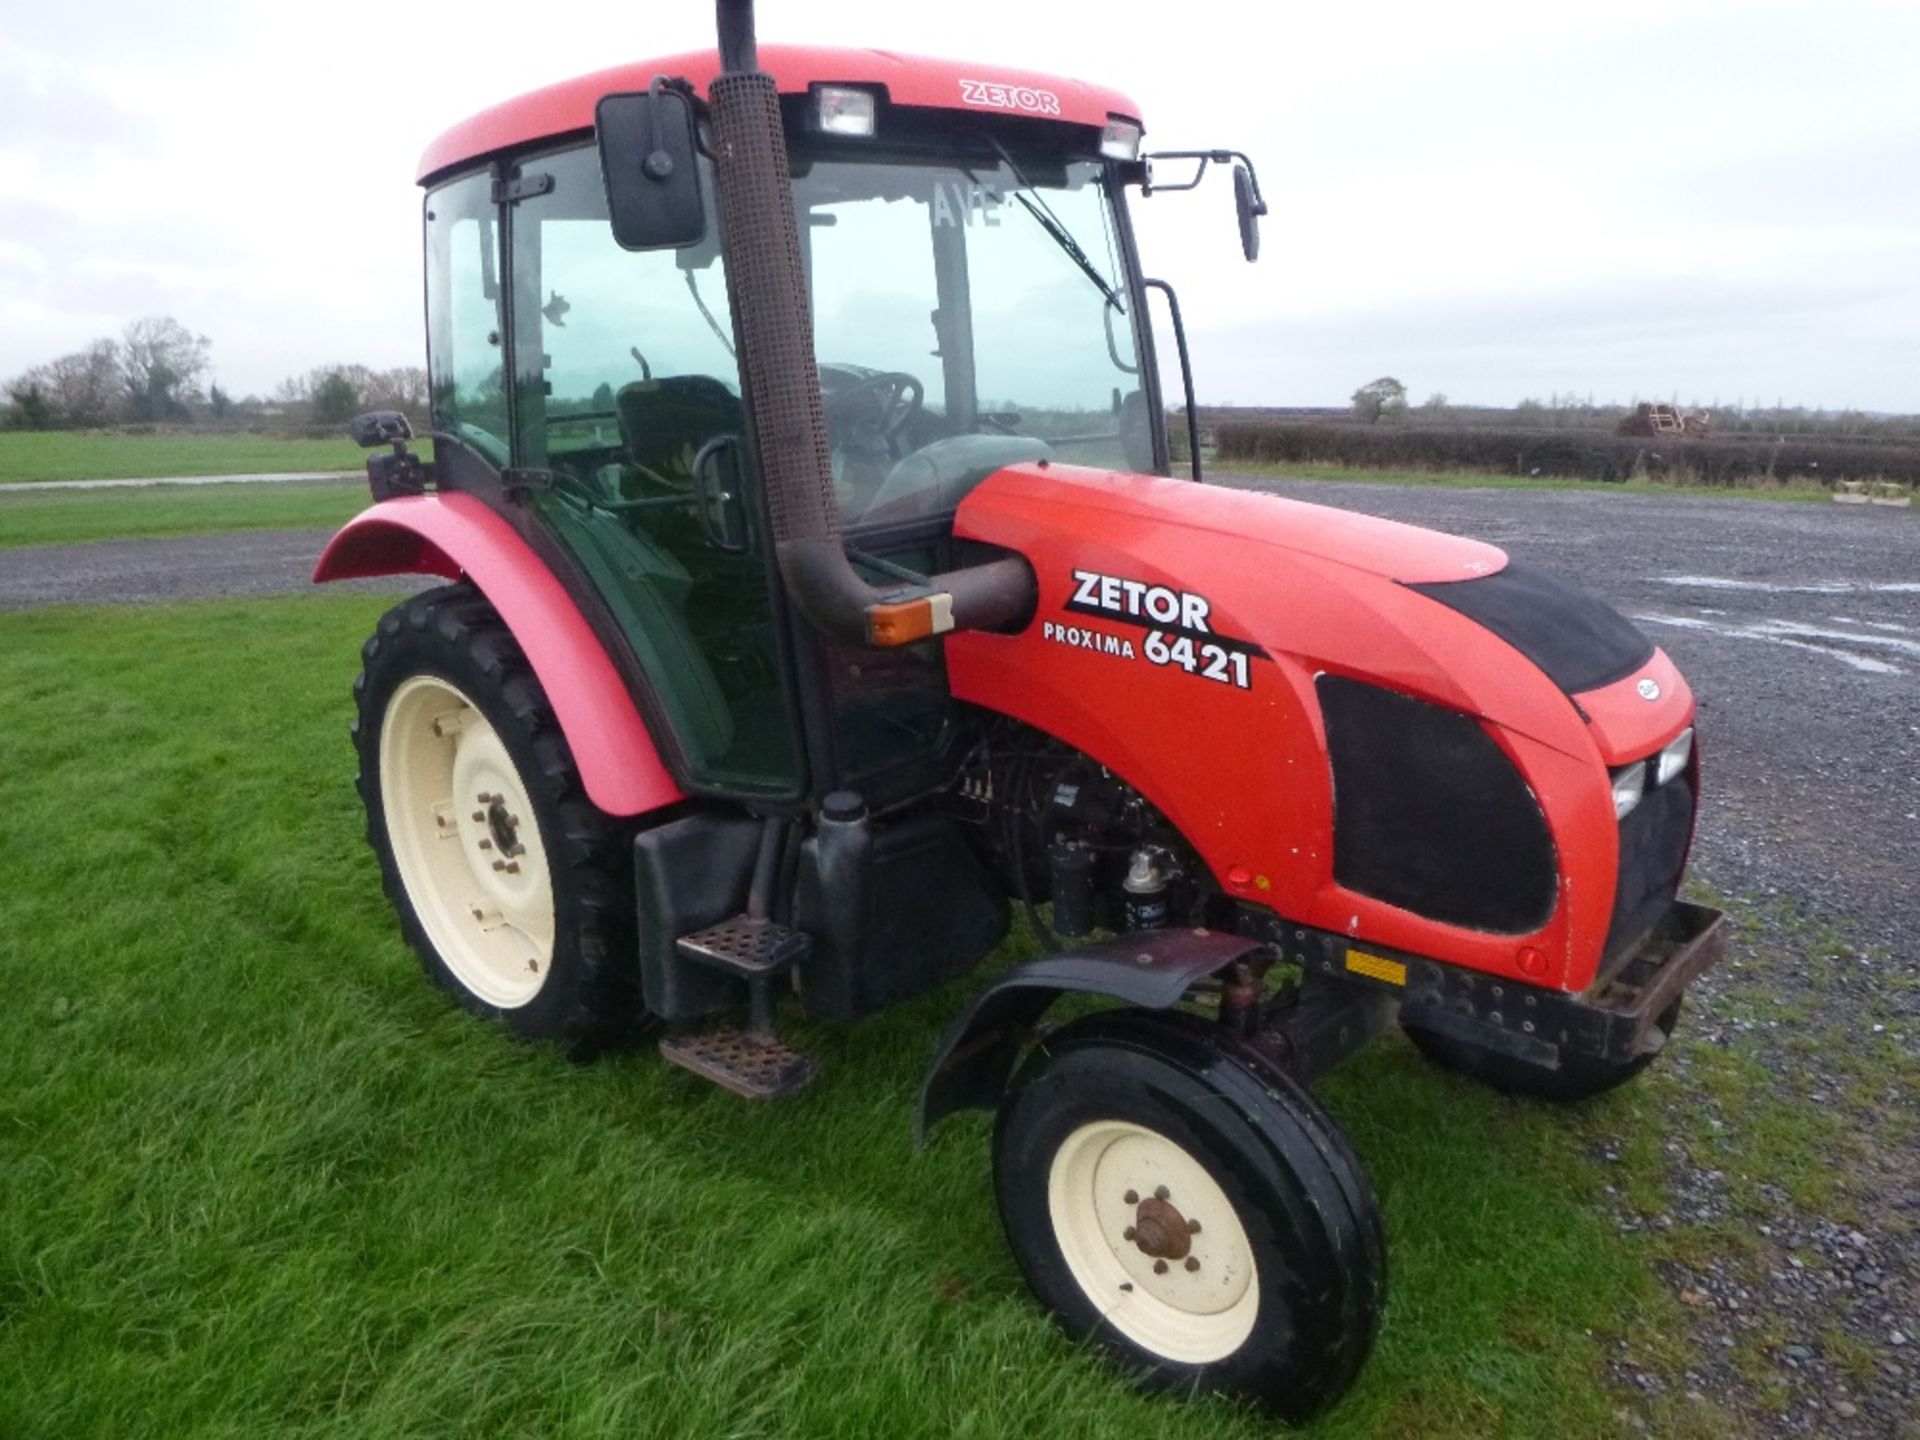 Zetor 6421 Proxima 2wd Tractor. V5 will be supplied.  4214 hrs.  Reg.No. WA05 OSV - Image 3 of 11